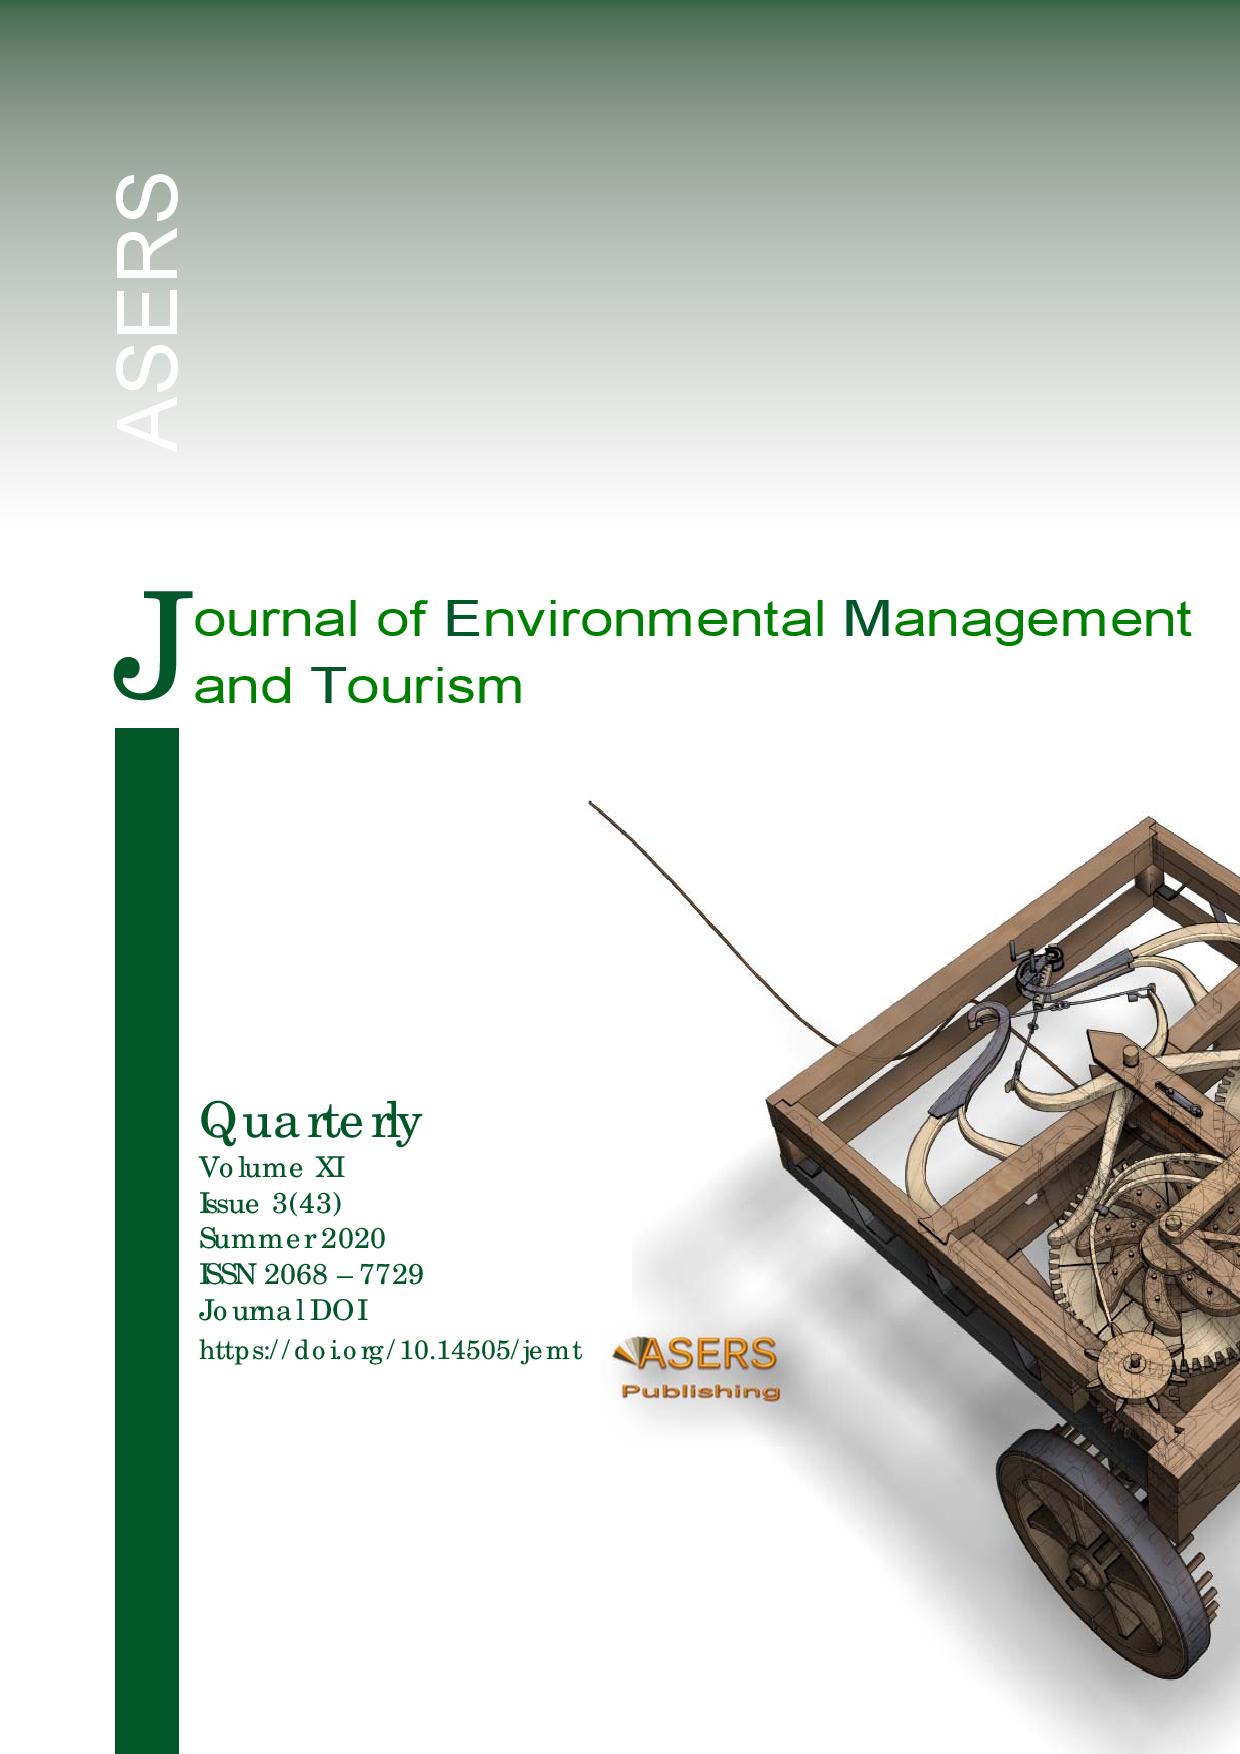 Application of Multi Criteria Decision Making in Adopting Suitable Solid Waste Management Model for an Urban Local Body. Case Study of Bhubaneswar City of Odisha, India Cover Image